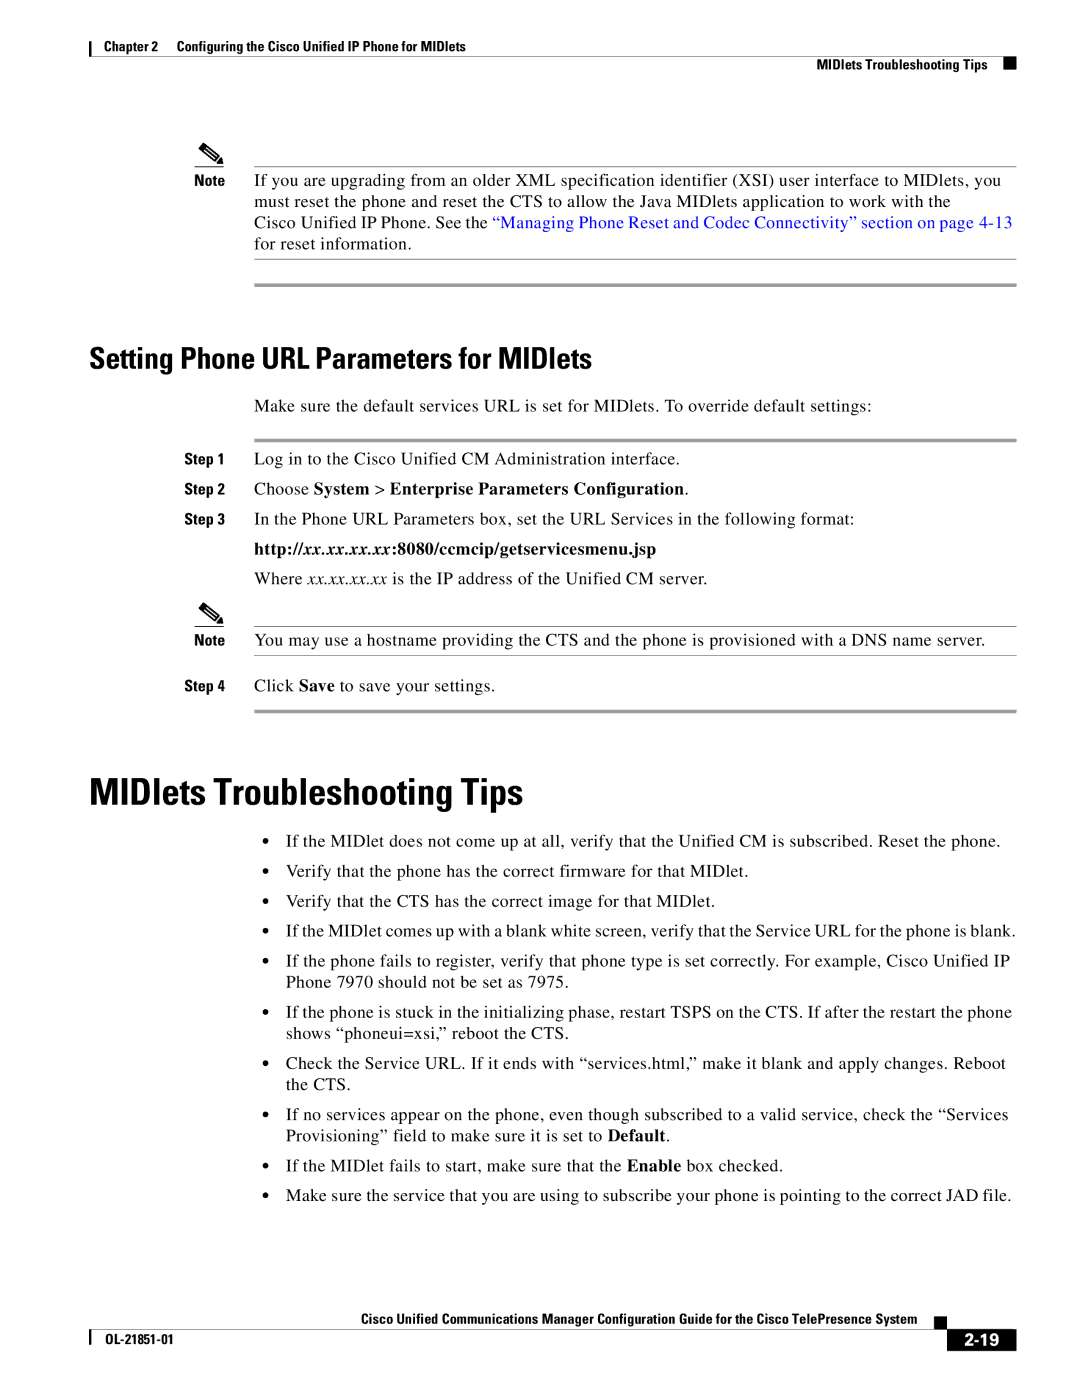 Cisco Systems OL-21851-01 manual MIDlets Troubleshooting Tips, Setting Phone URL Parameters for MIDlets 